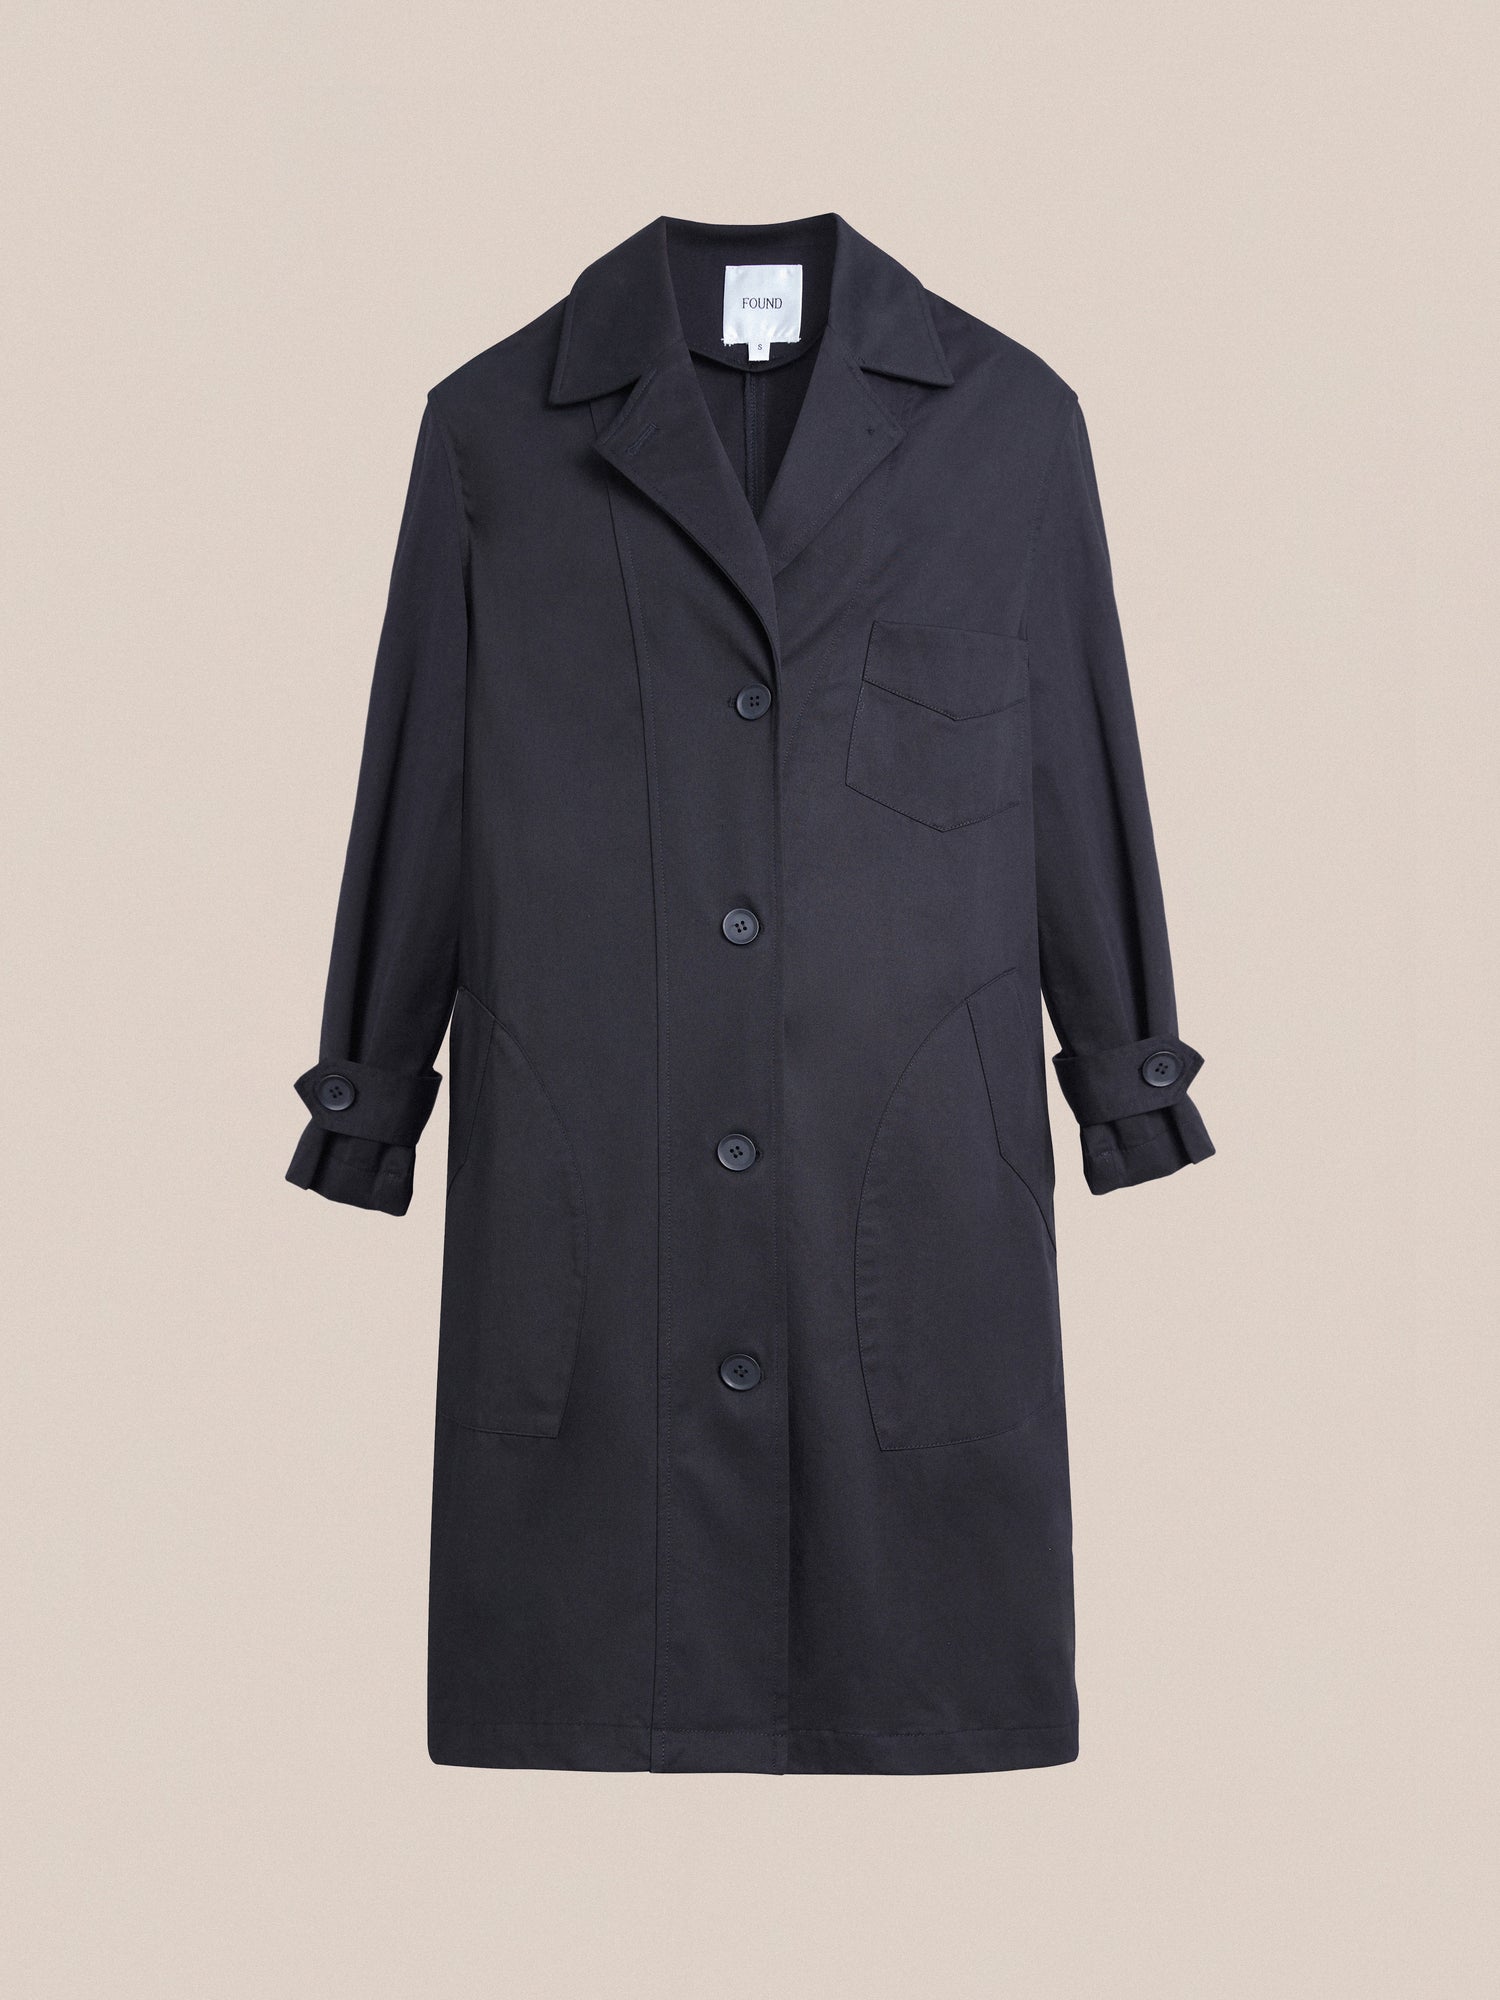 A black Found Naval Trench Coat with buttons and pockets, crafted from premium materials.